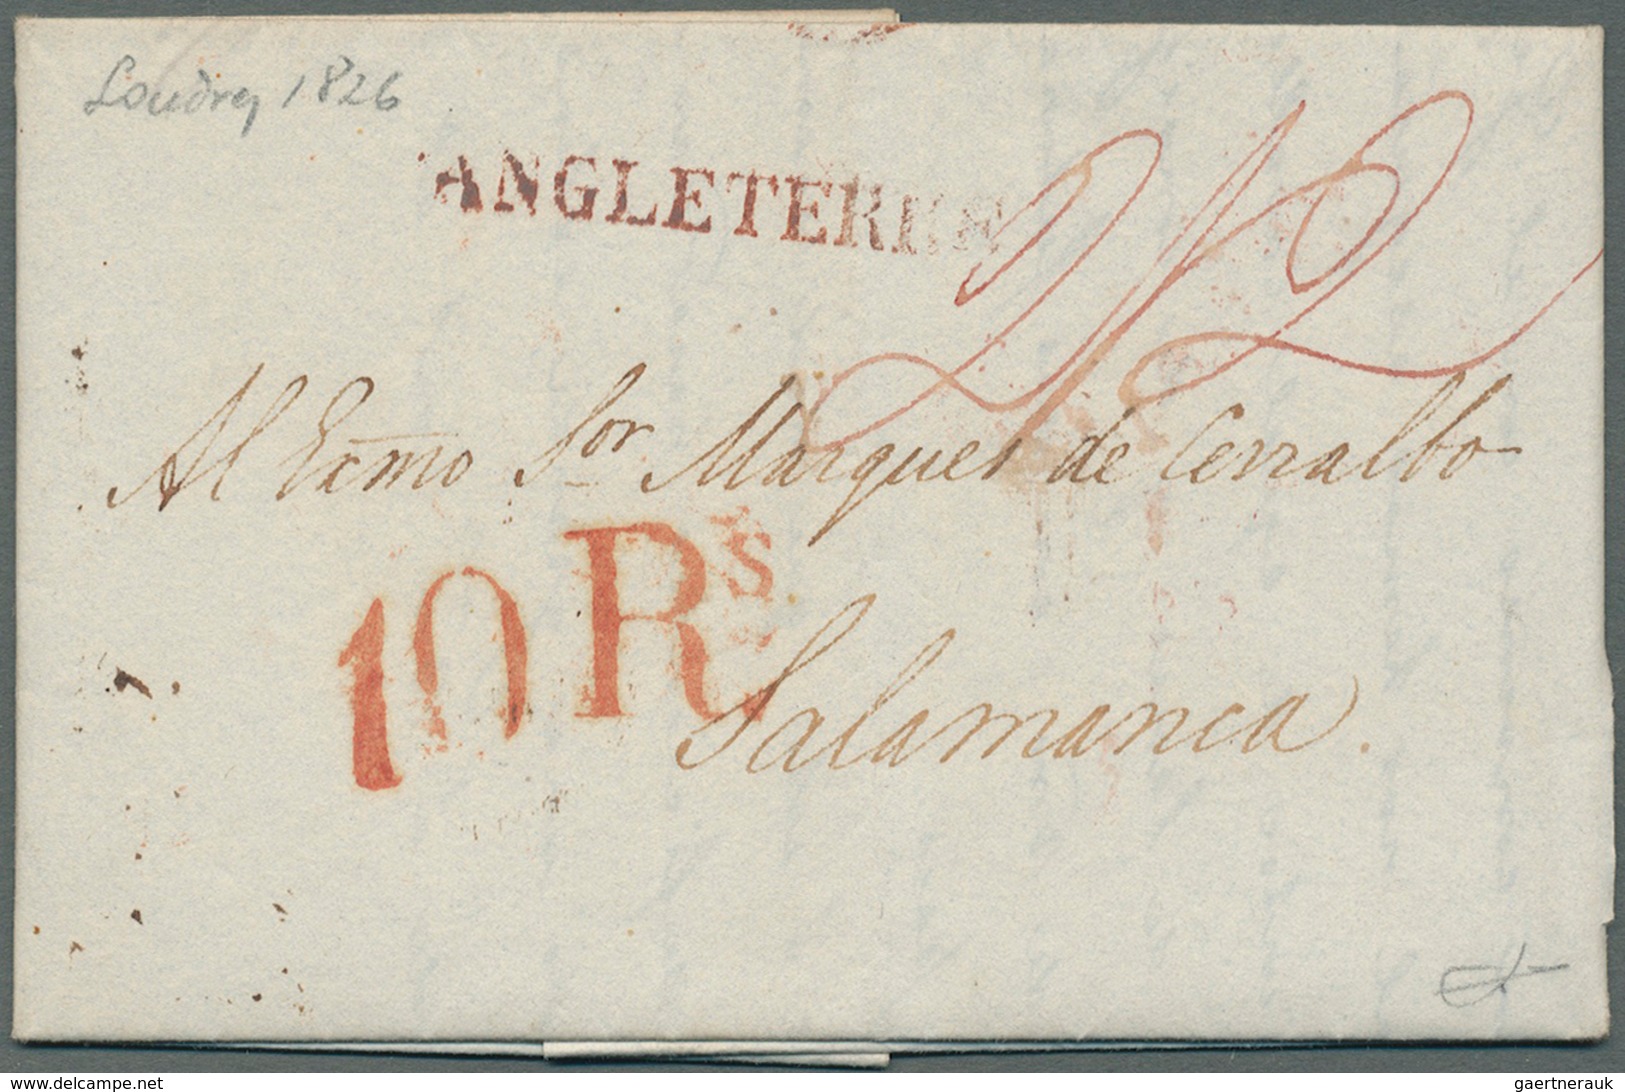 Großbritannien - Vorphila: 1791/1850 ca., 360 early covers with a great variety of cancellations, ma